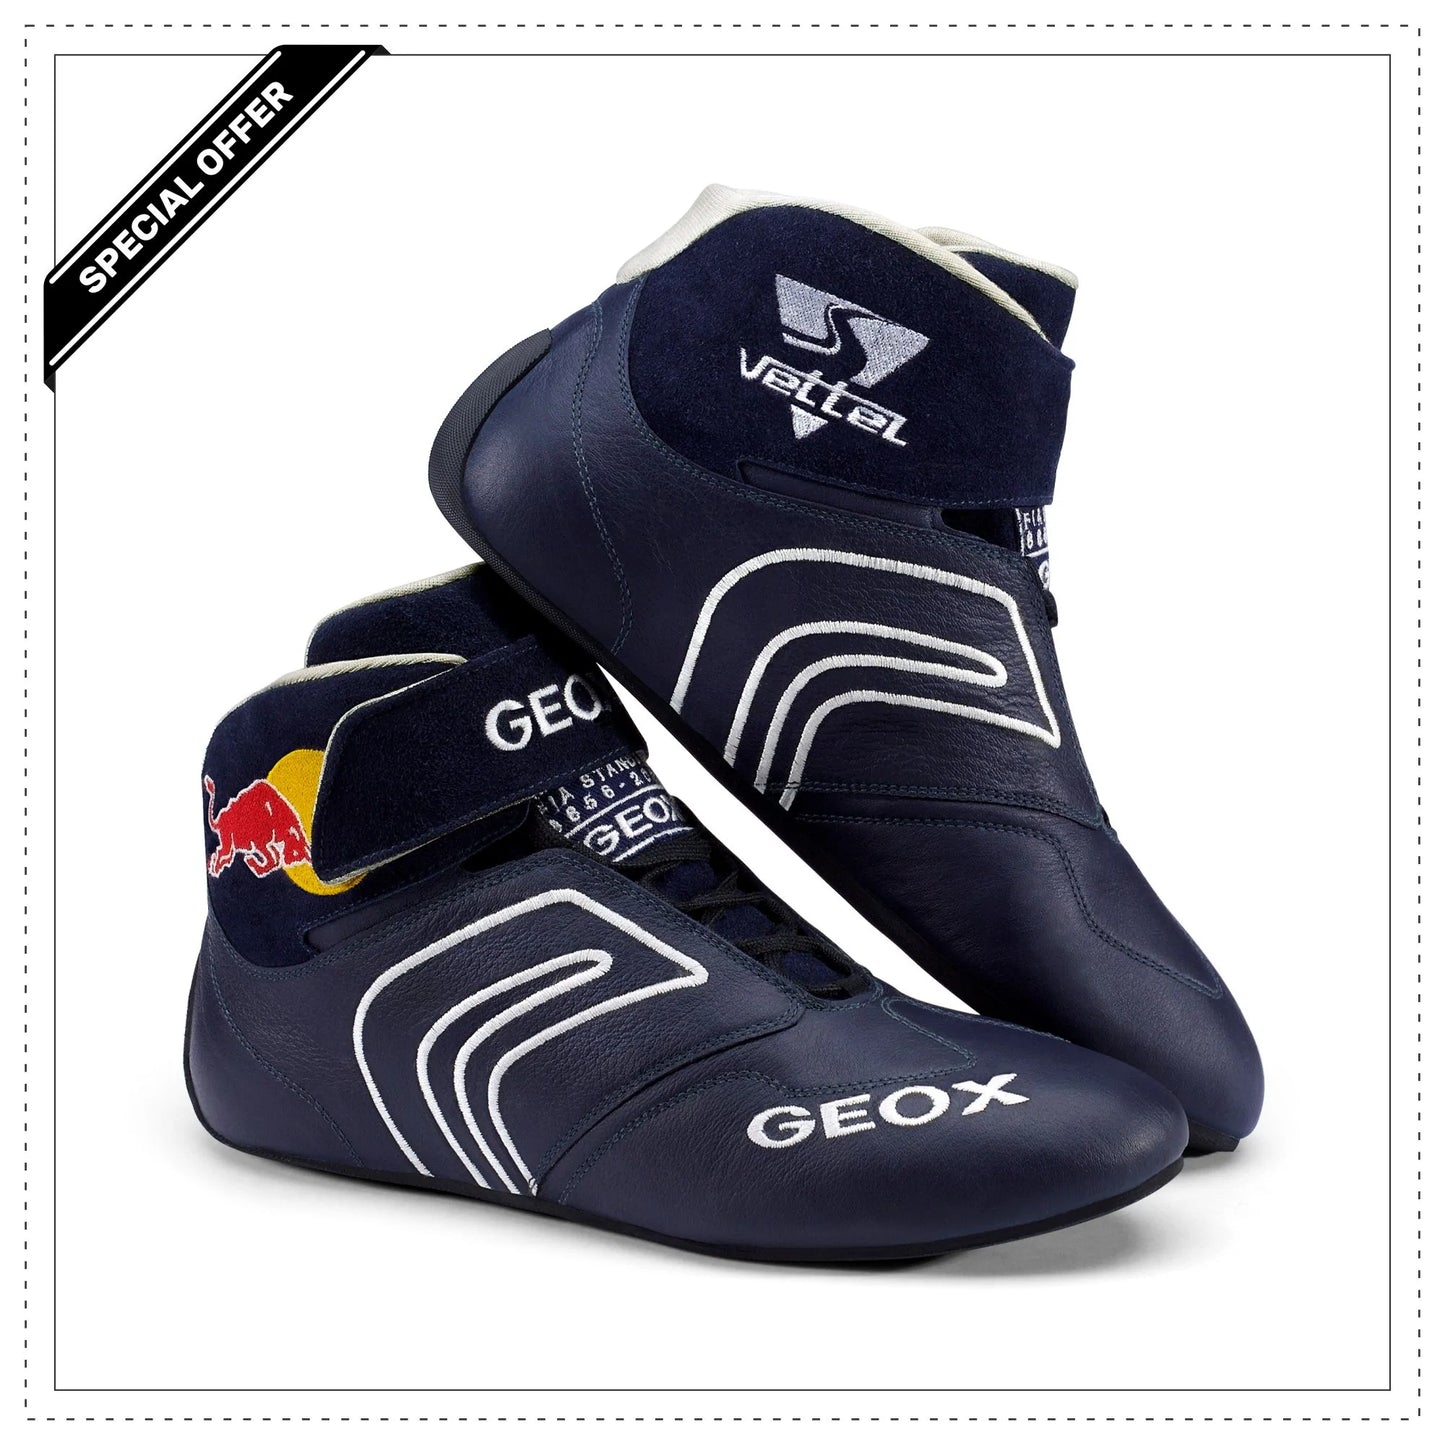 Redbull Geox Race Shoes